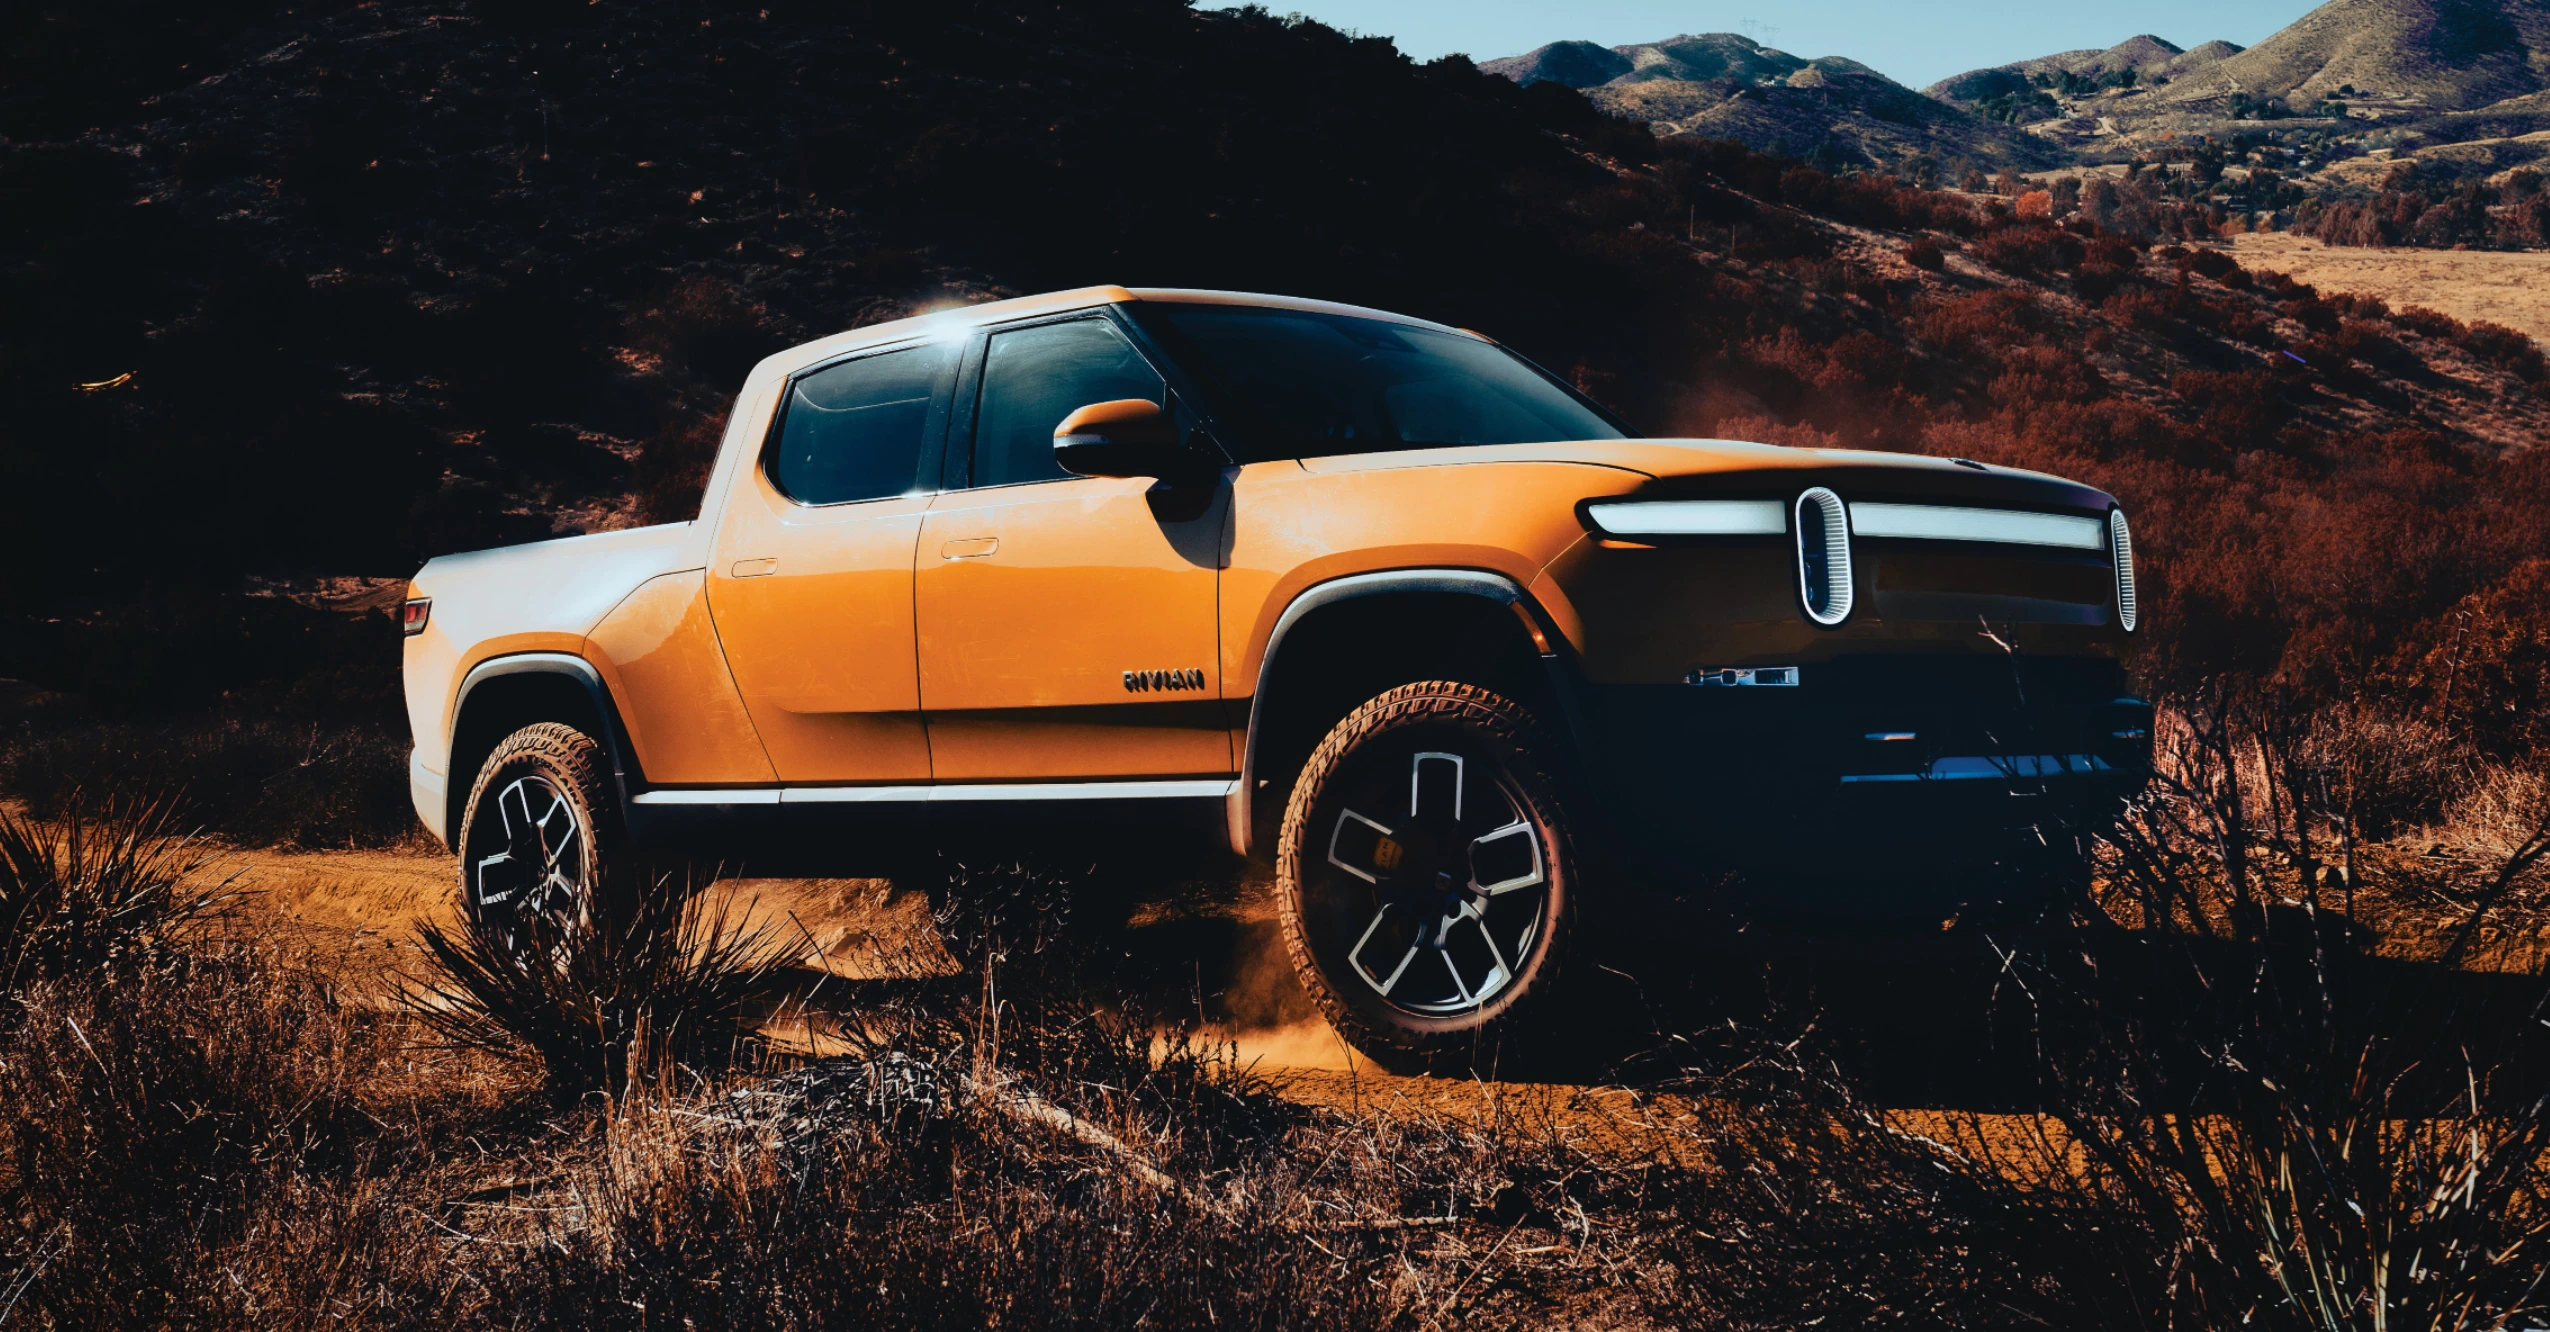 Meet The Rivian R1T, The First Electric Pickup You Can Actually Buy